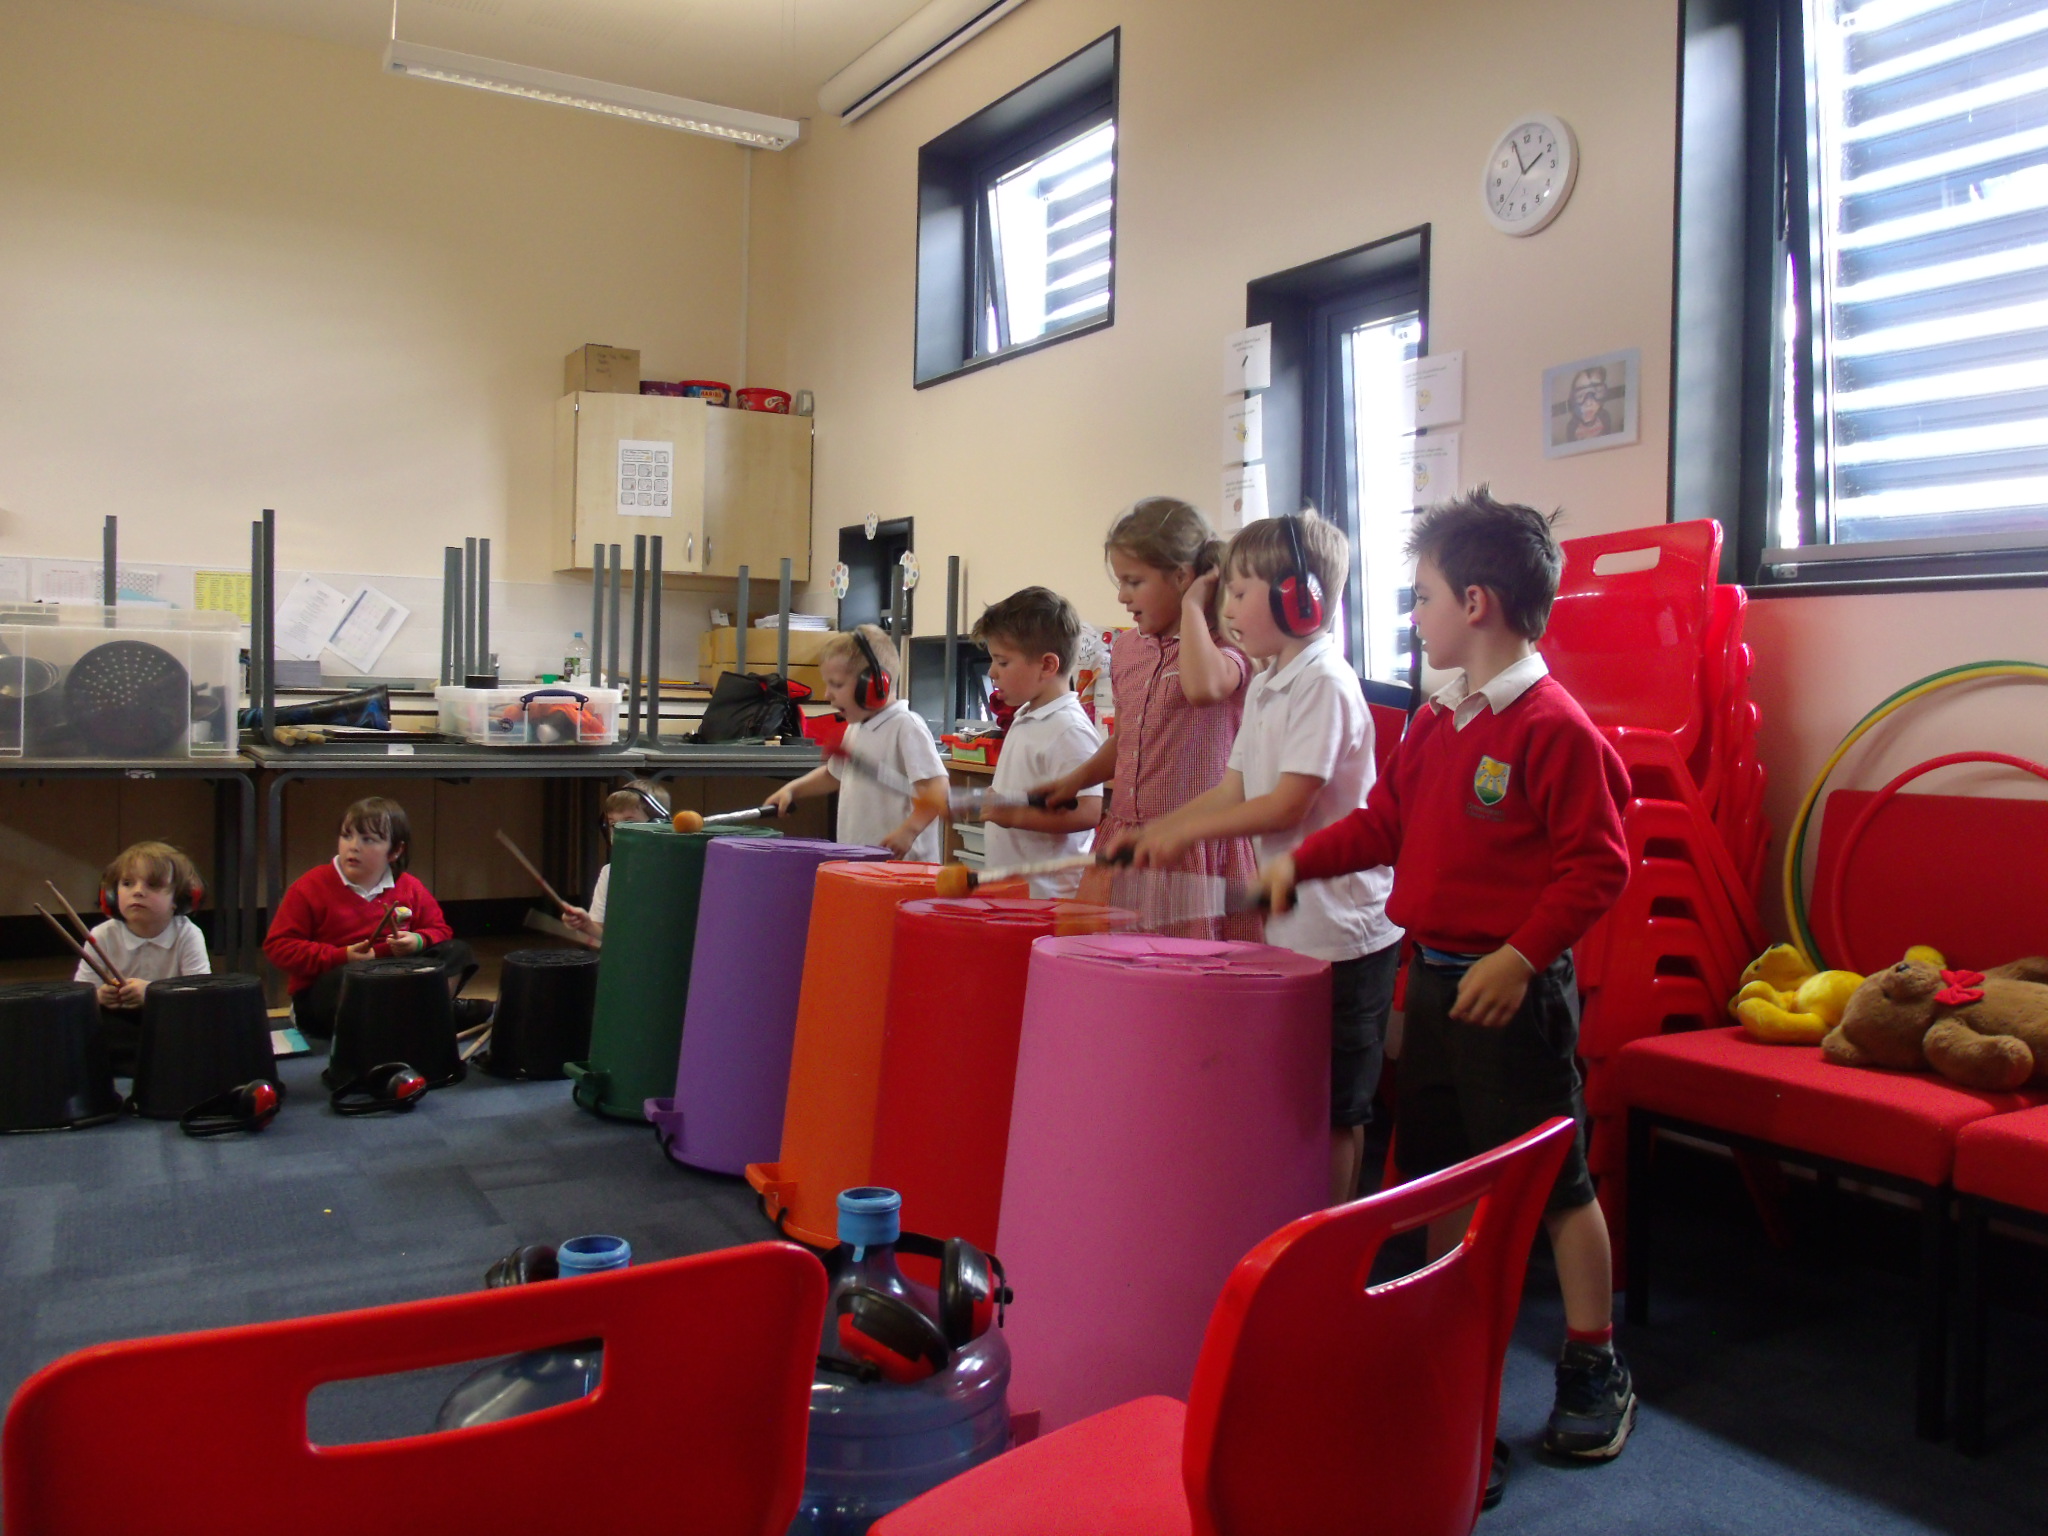 School children playing music on large colourful empty bins